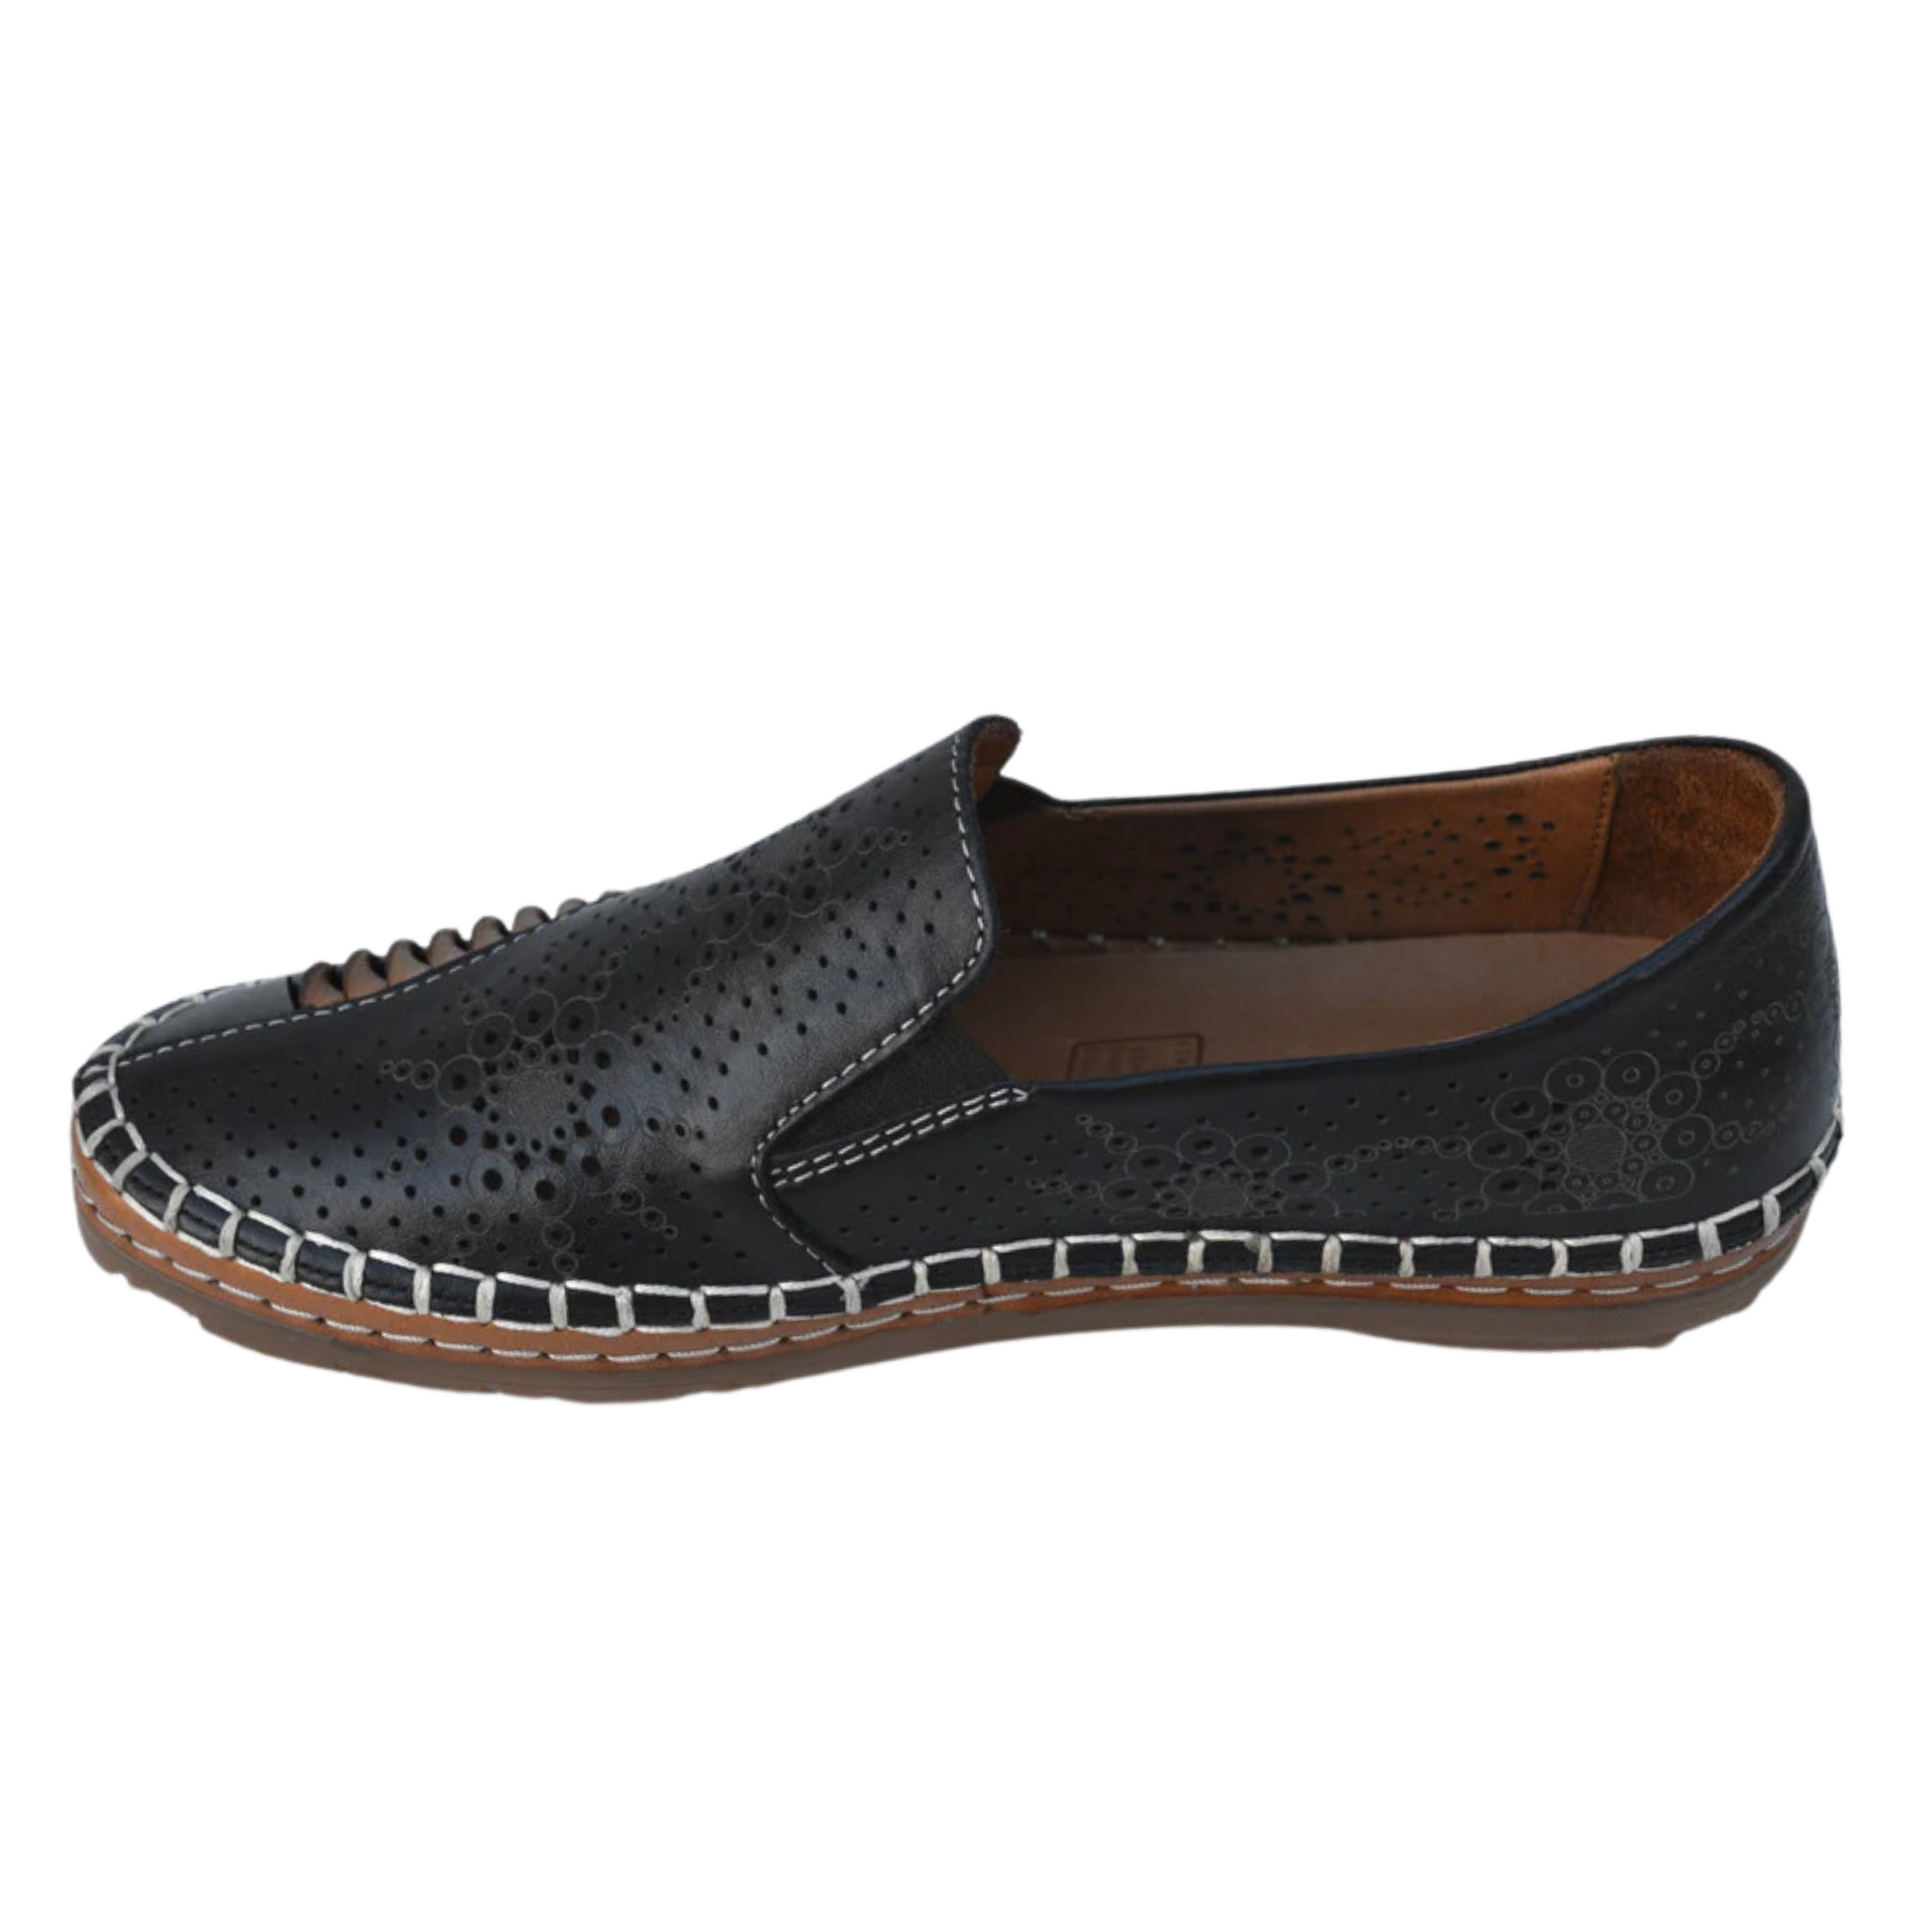 Left facing view of black leather shoe with embossed details and brown rubber outsole